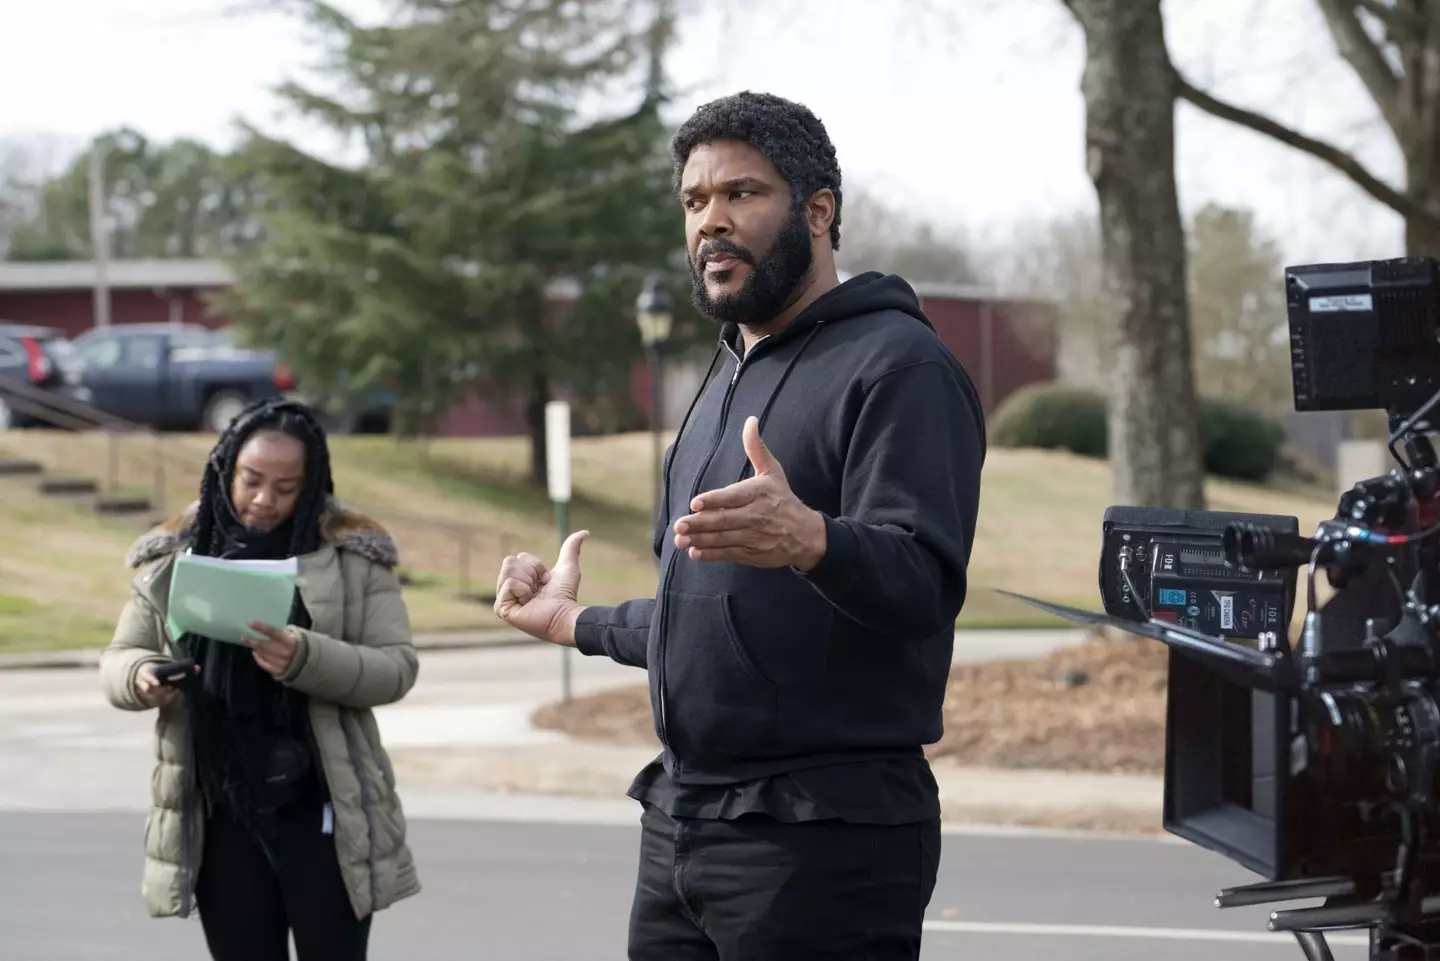 Tyler Perry's own movie studios are absolutely massive, and he's used them for some very good causes too.